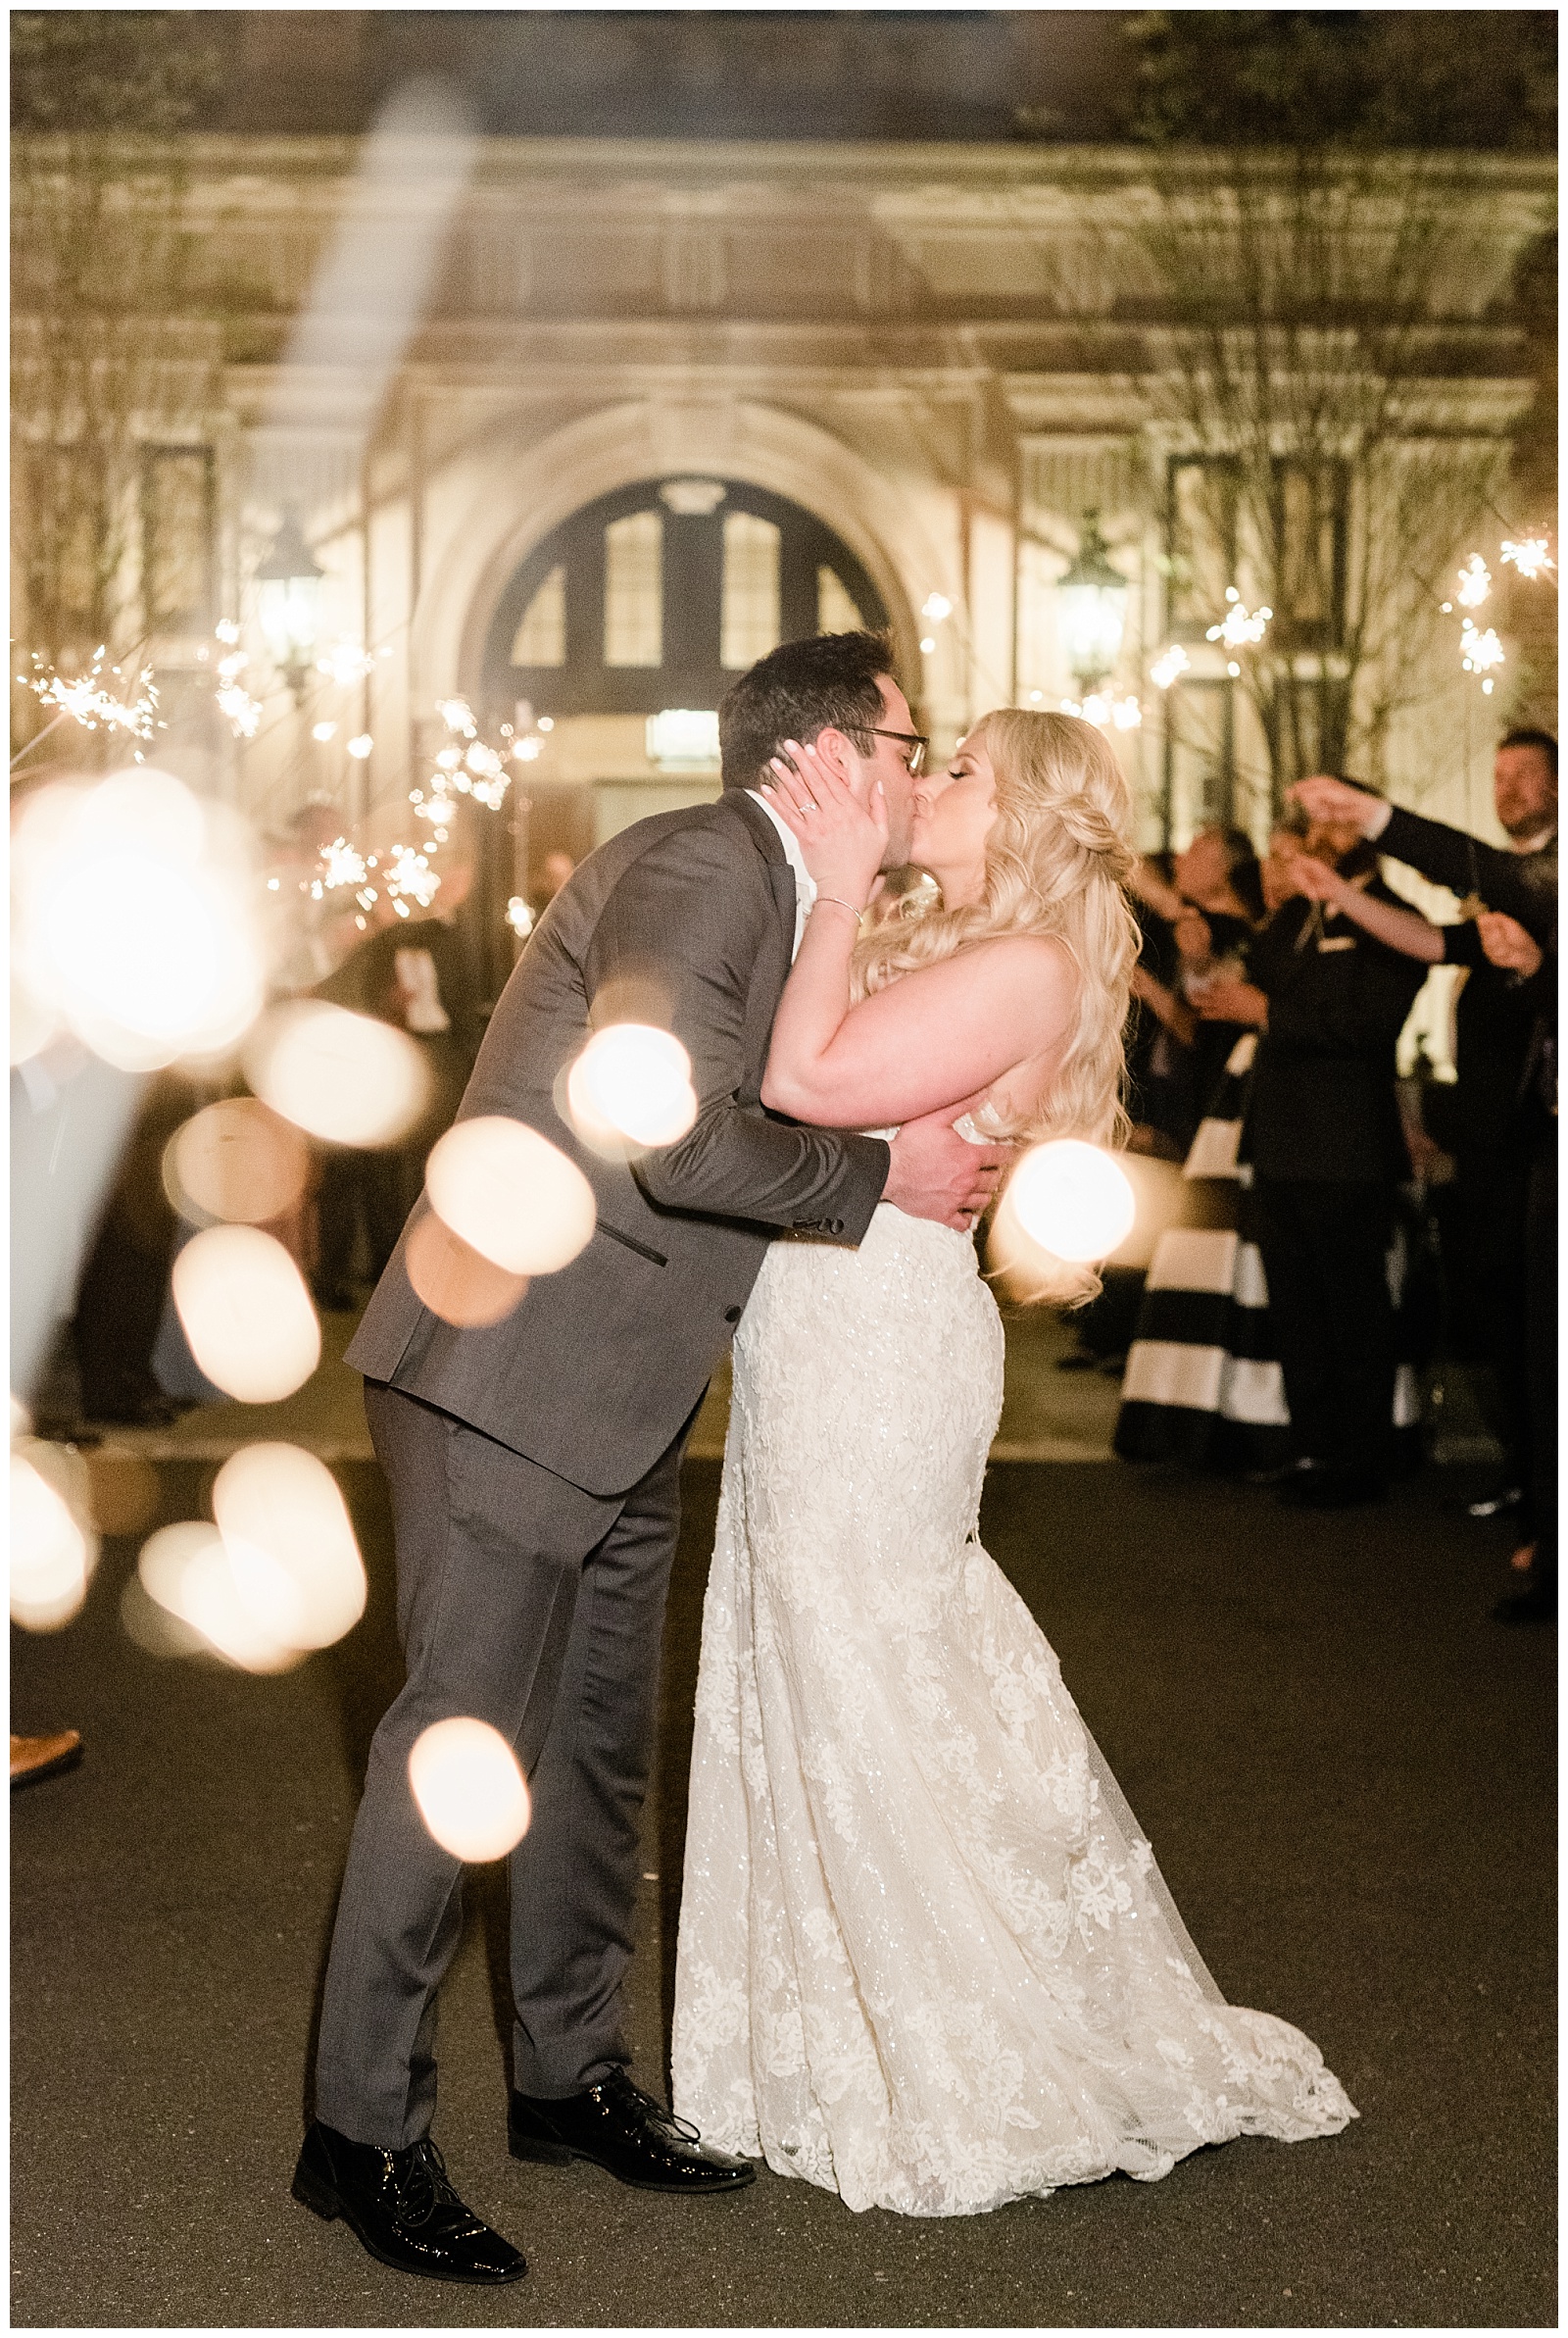 A bride and groom kiss during a sparkler sendoff outside the Mansion at Natirar at the end of their wedding day.